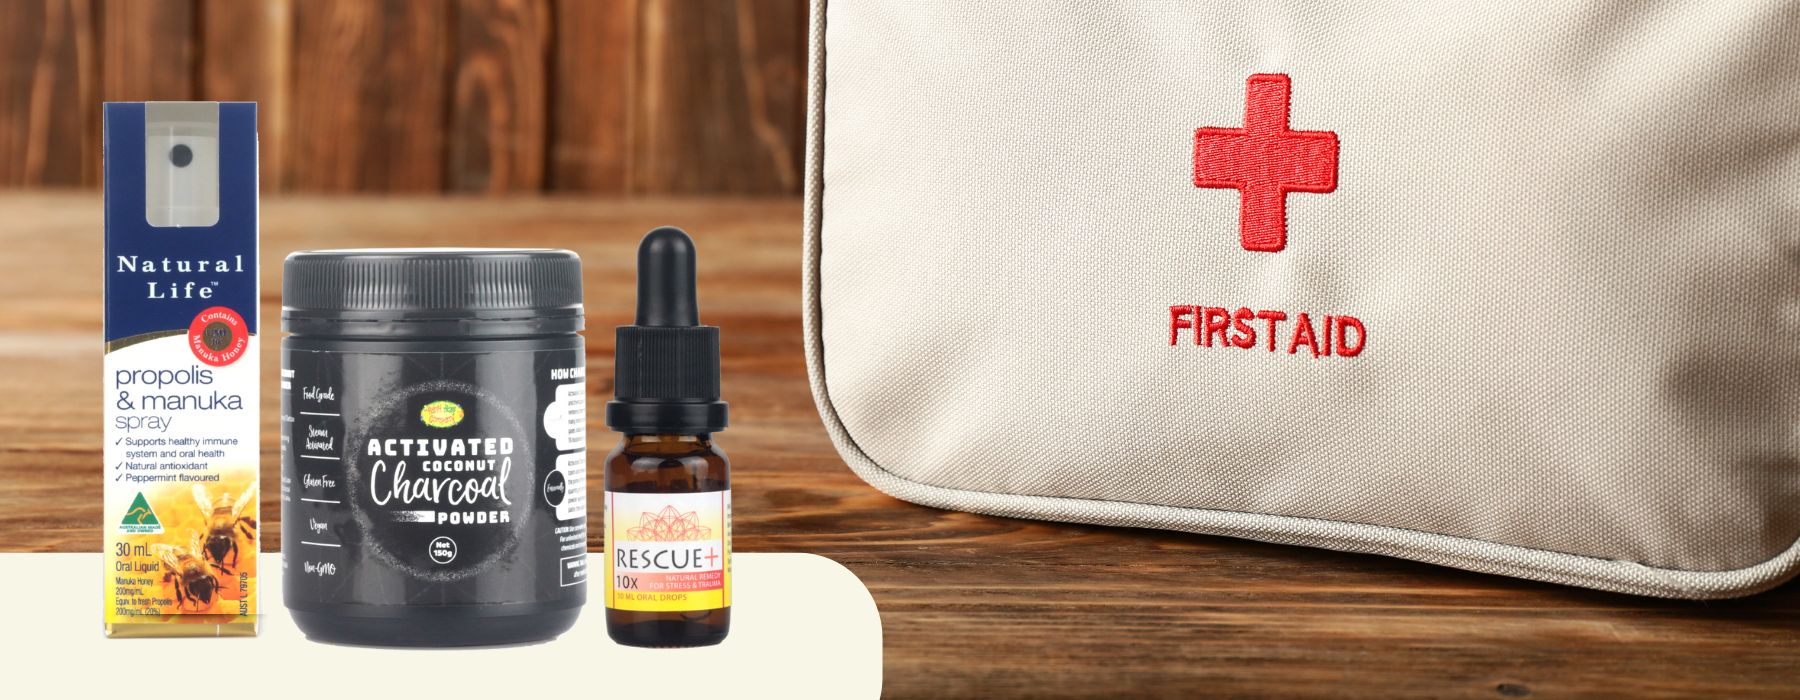 Propolis spray, activated charcoal and rescue plus bottle in front of first aid kit.